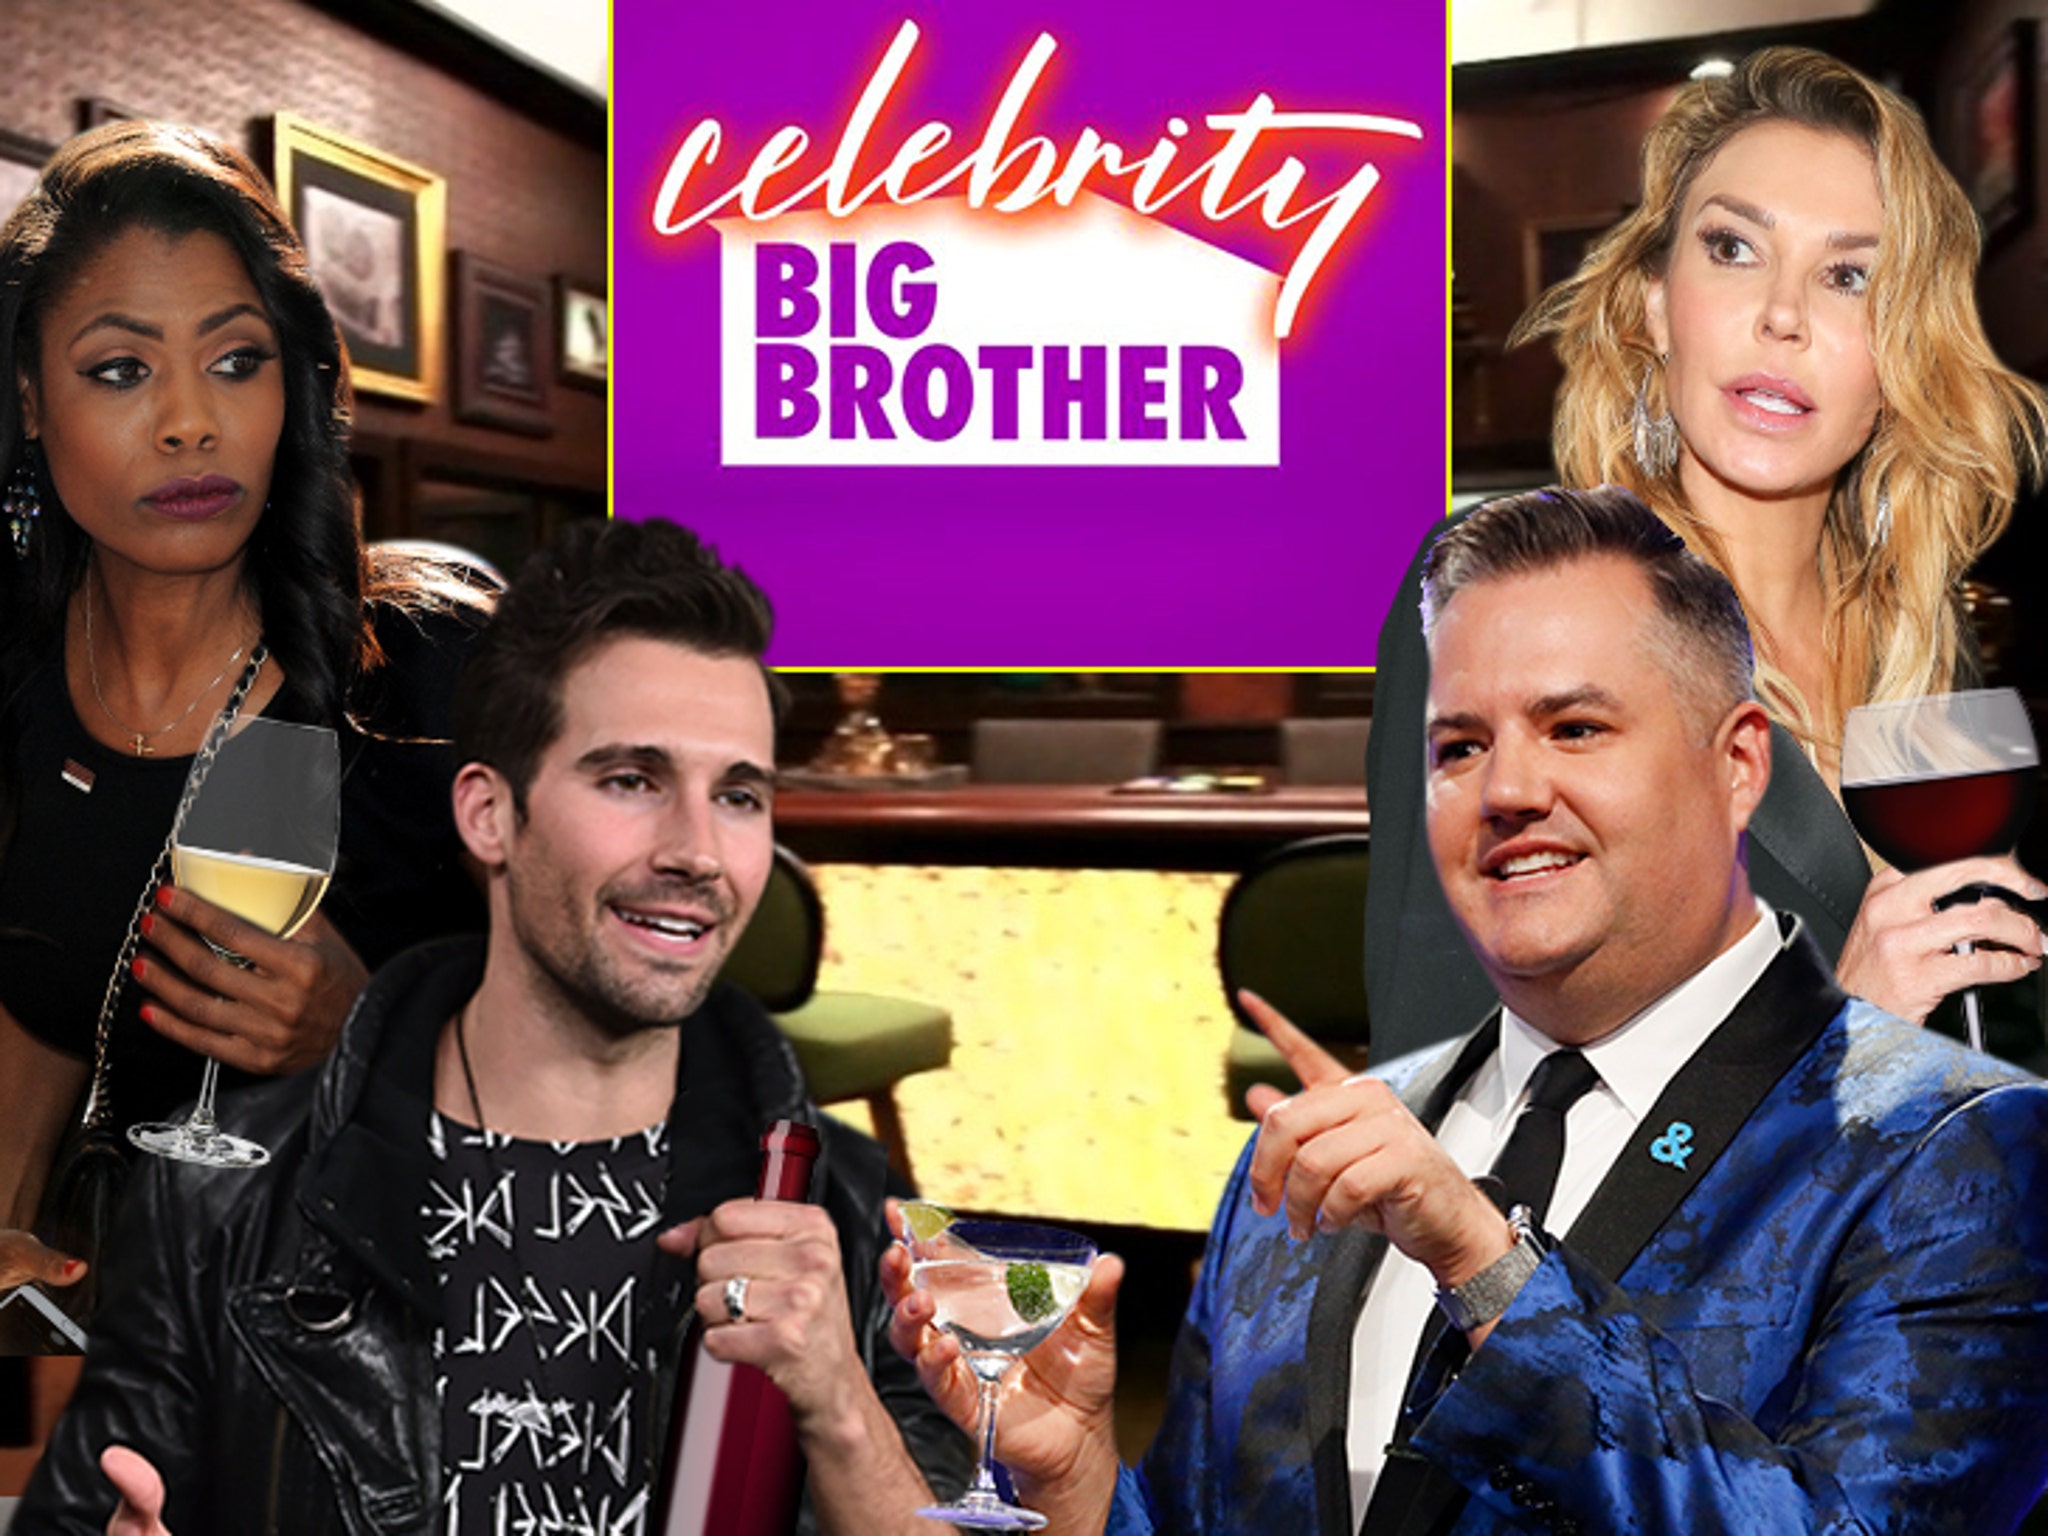 Big Brother: Celebrity Edition: Get to Know the Season 2 Cast - TV Guide